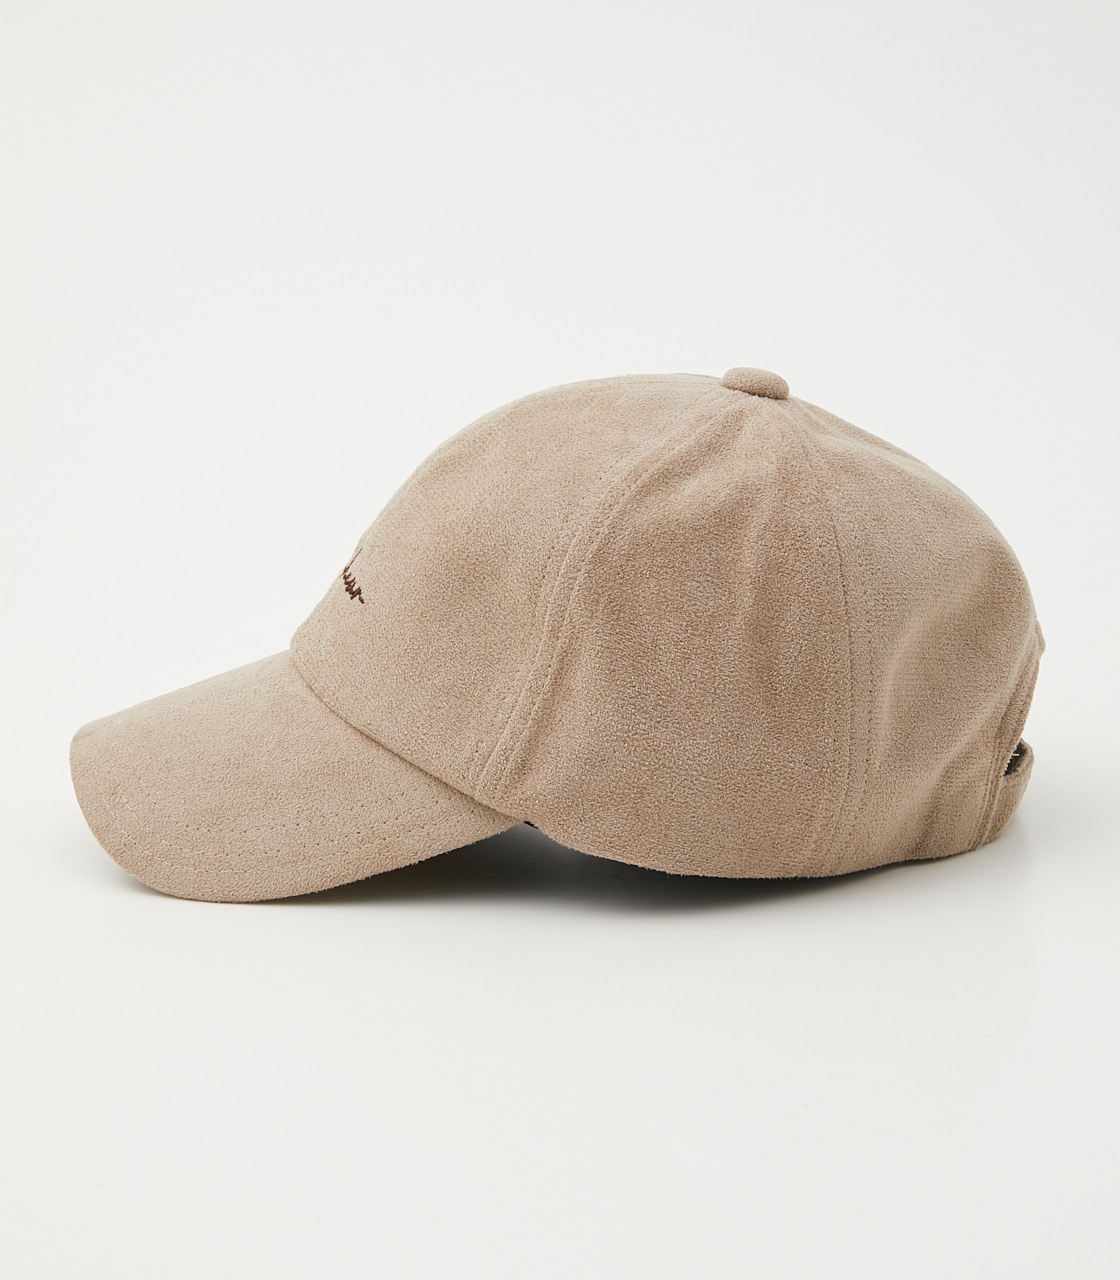 ECO SUEDE LOGO CAP/エコスエードロゴキャップ 詳細画像 L/BEG 3